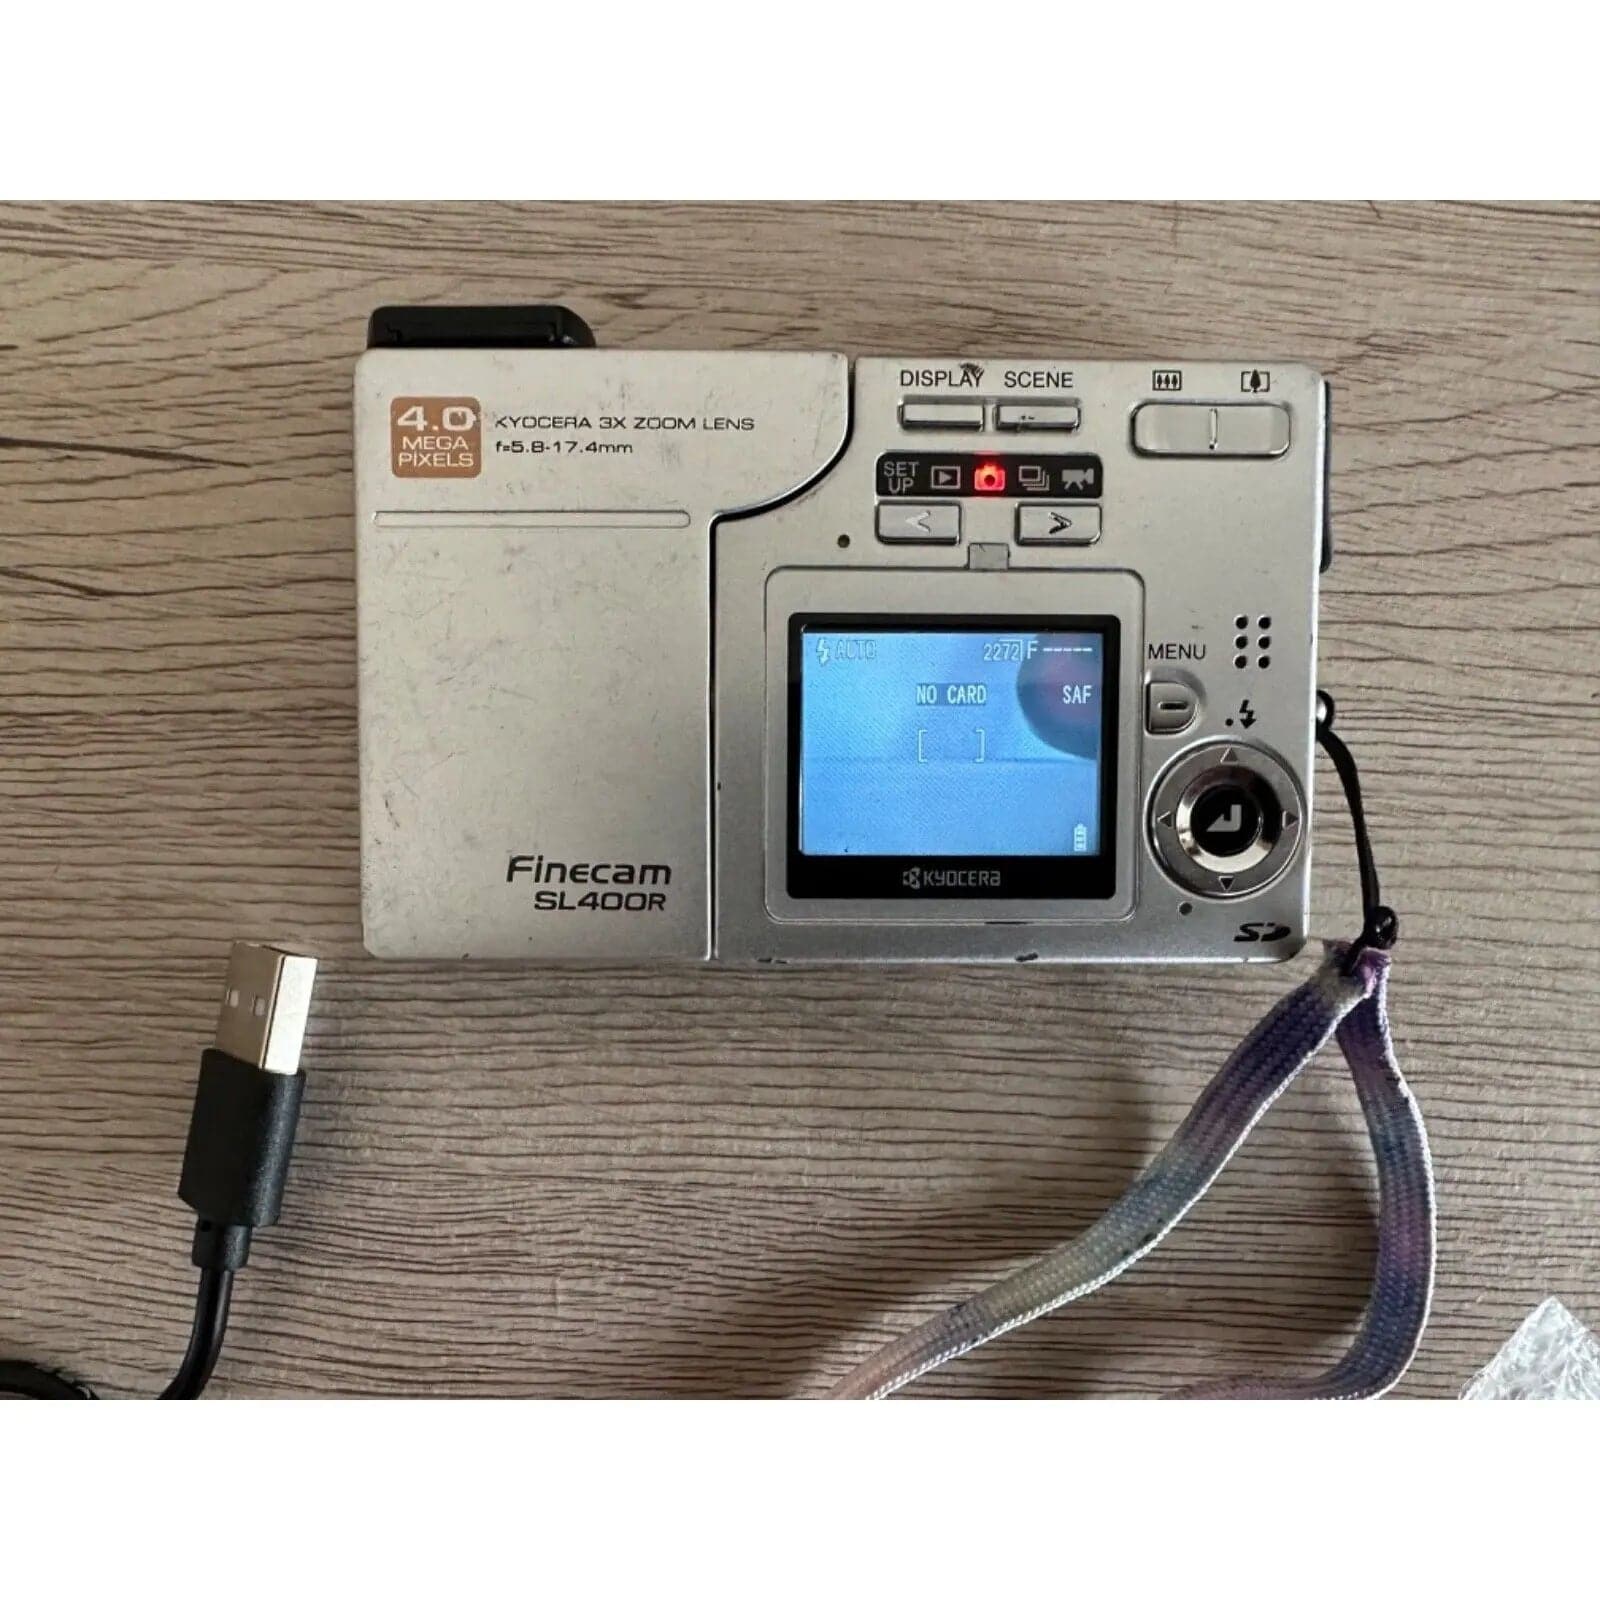 Kyocera Finecam SL400R Silver with charger + extra – Saya Trading VOF